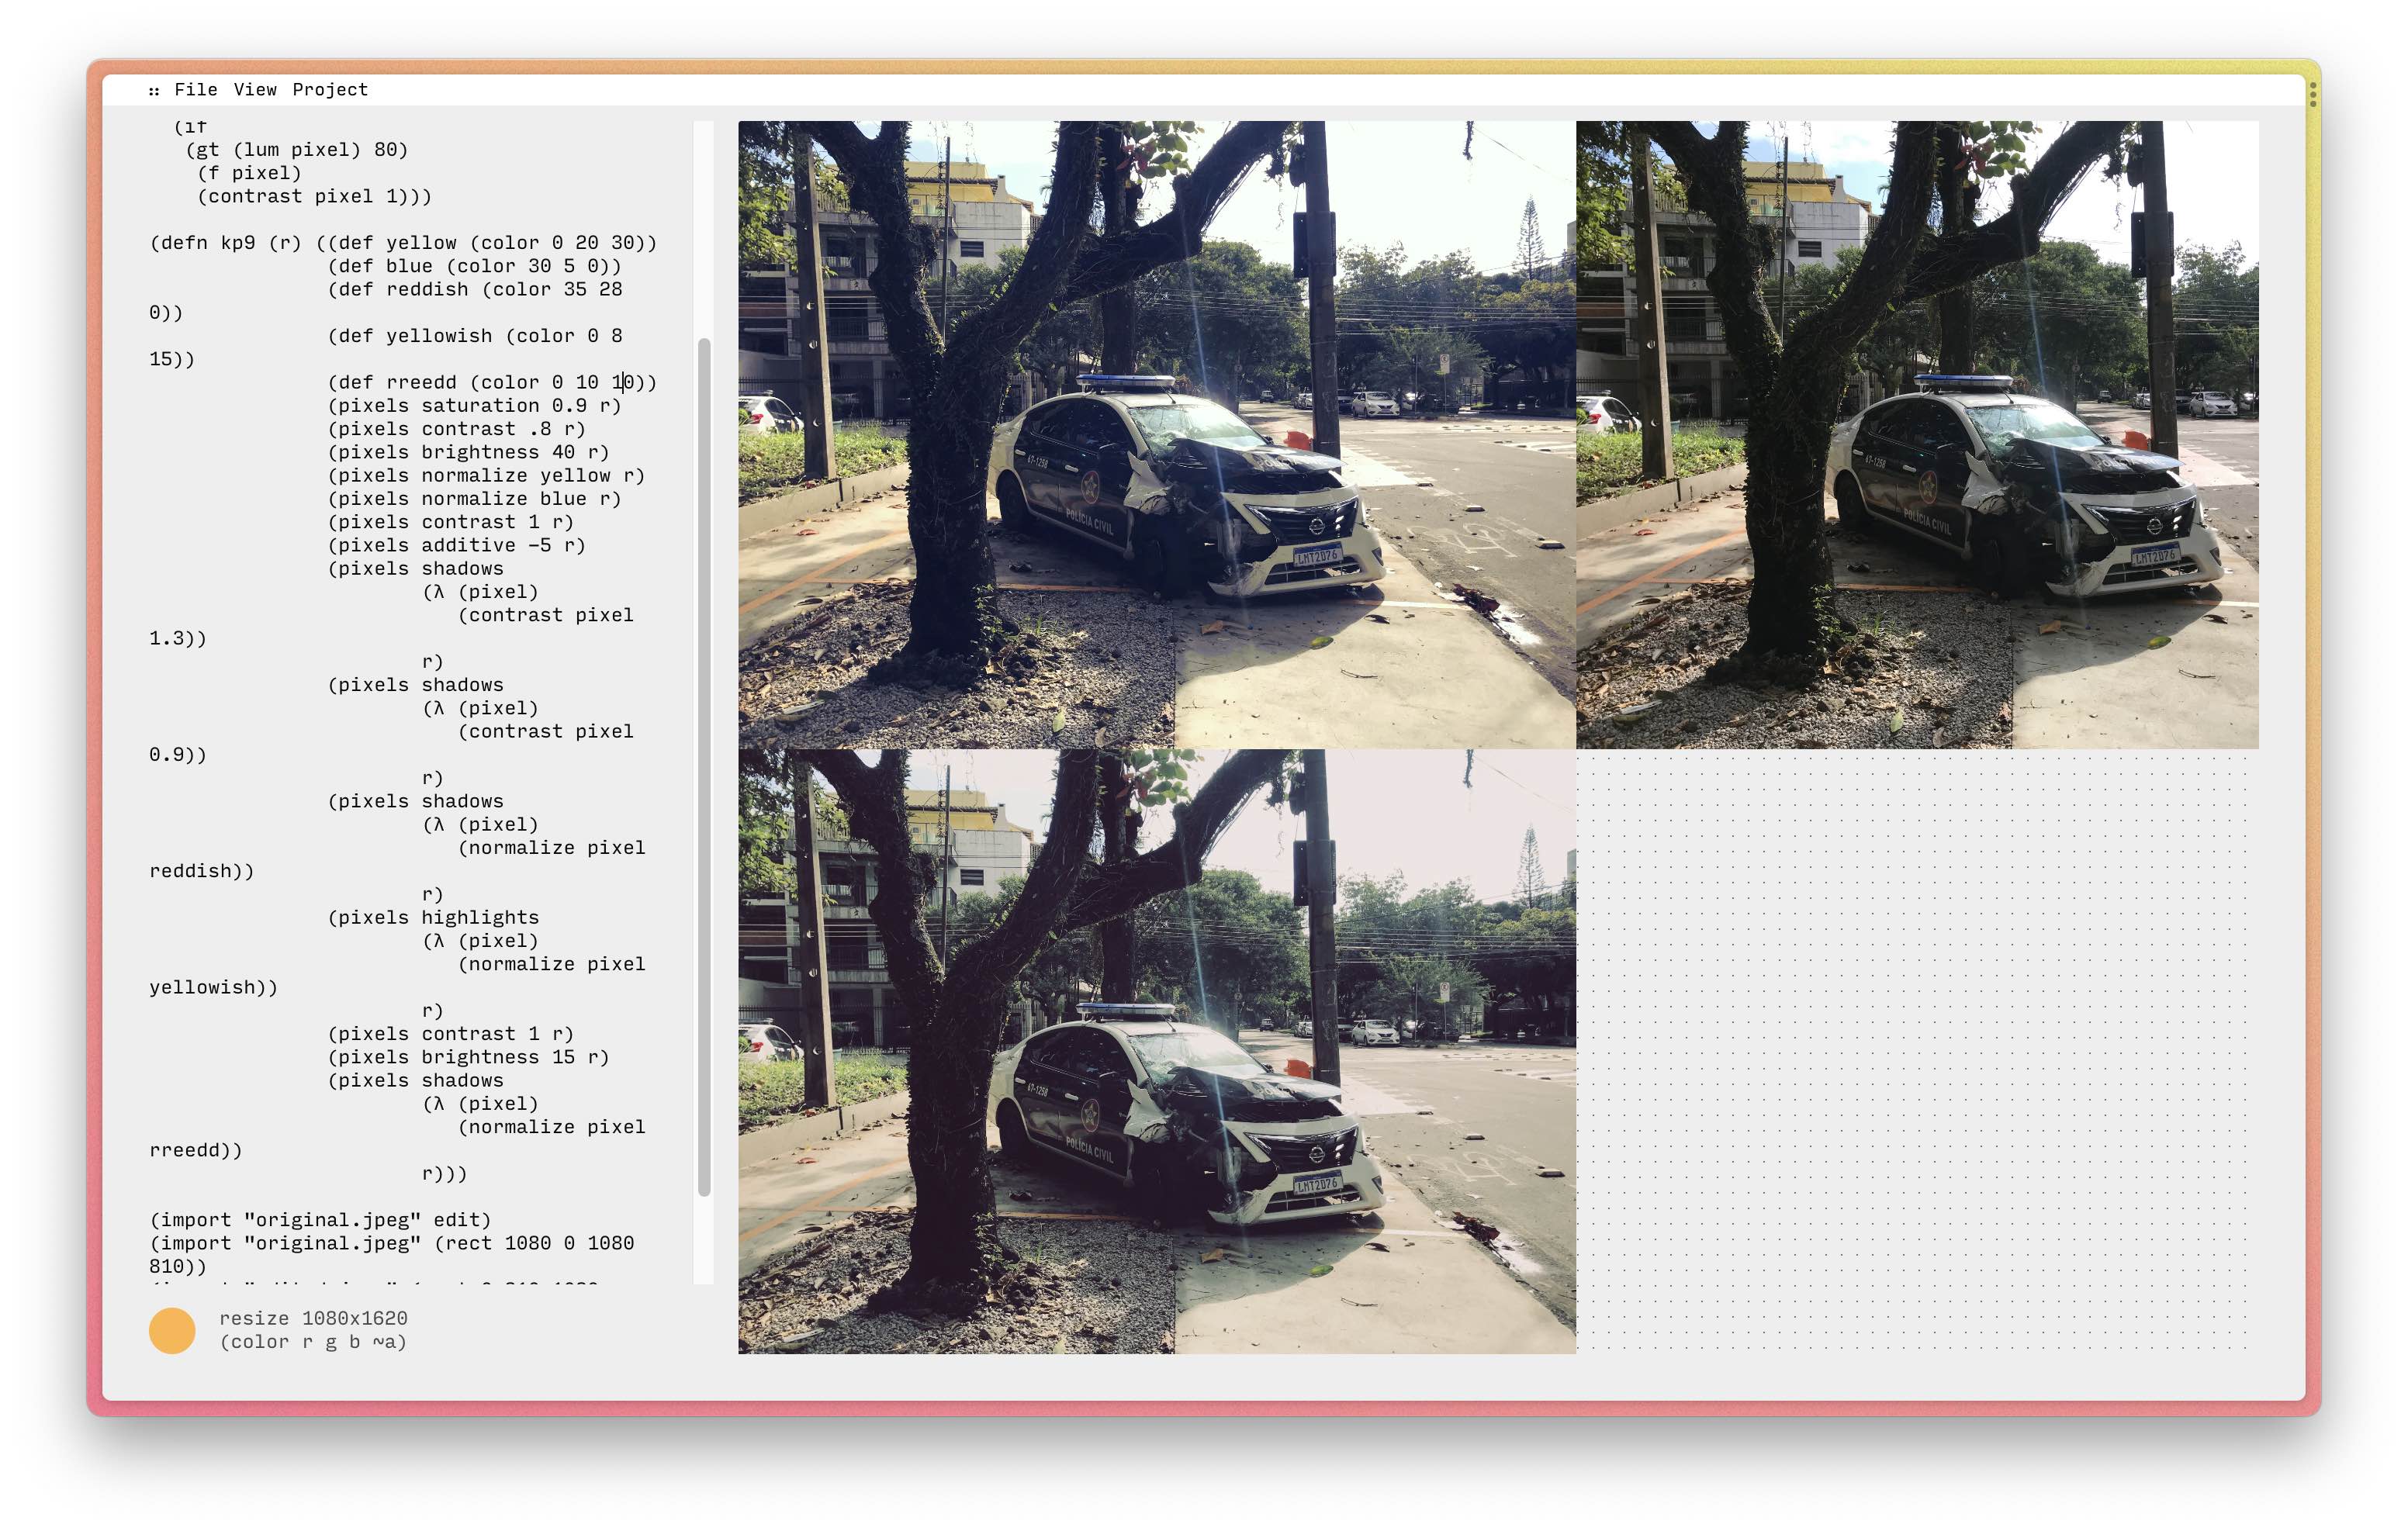 a lisp text editor on the left, on the right are 3 images of a crashed police car in a tropical suburb